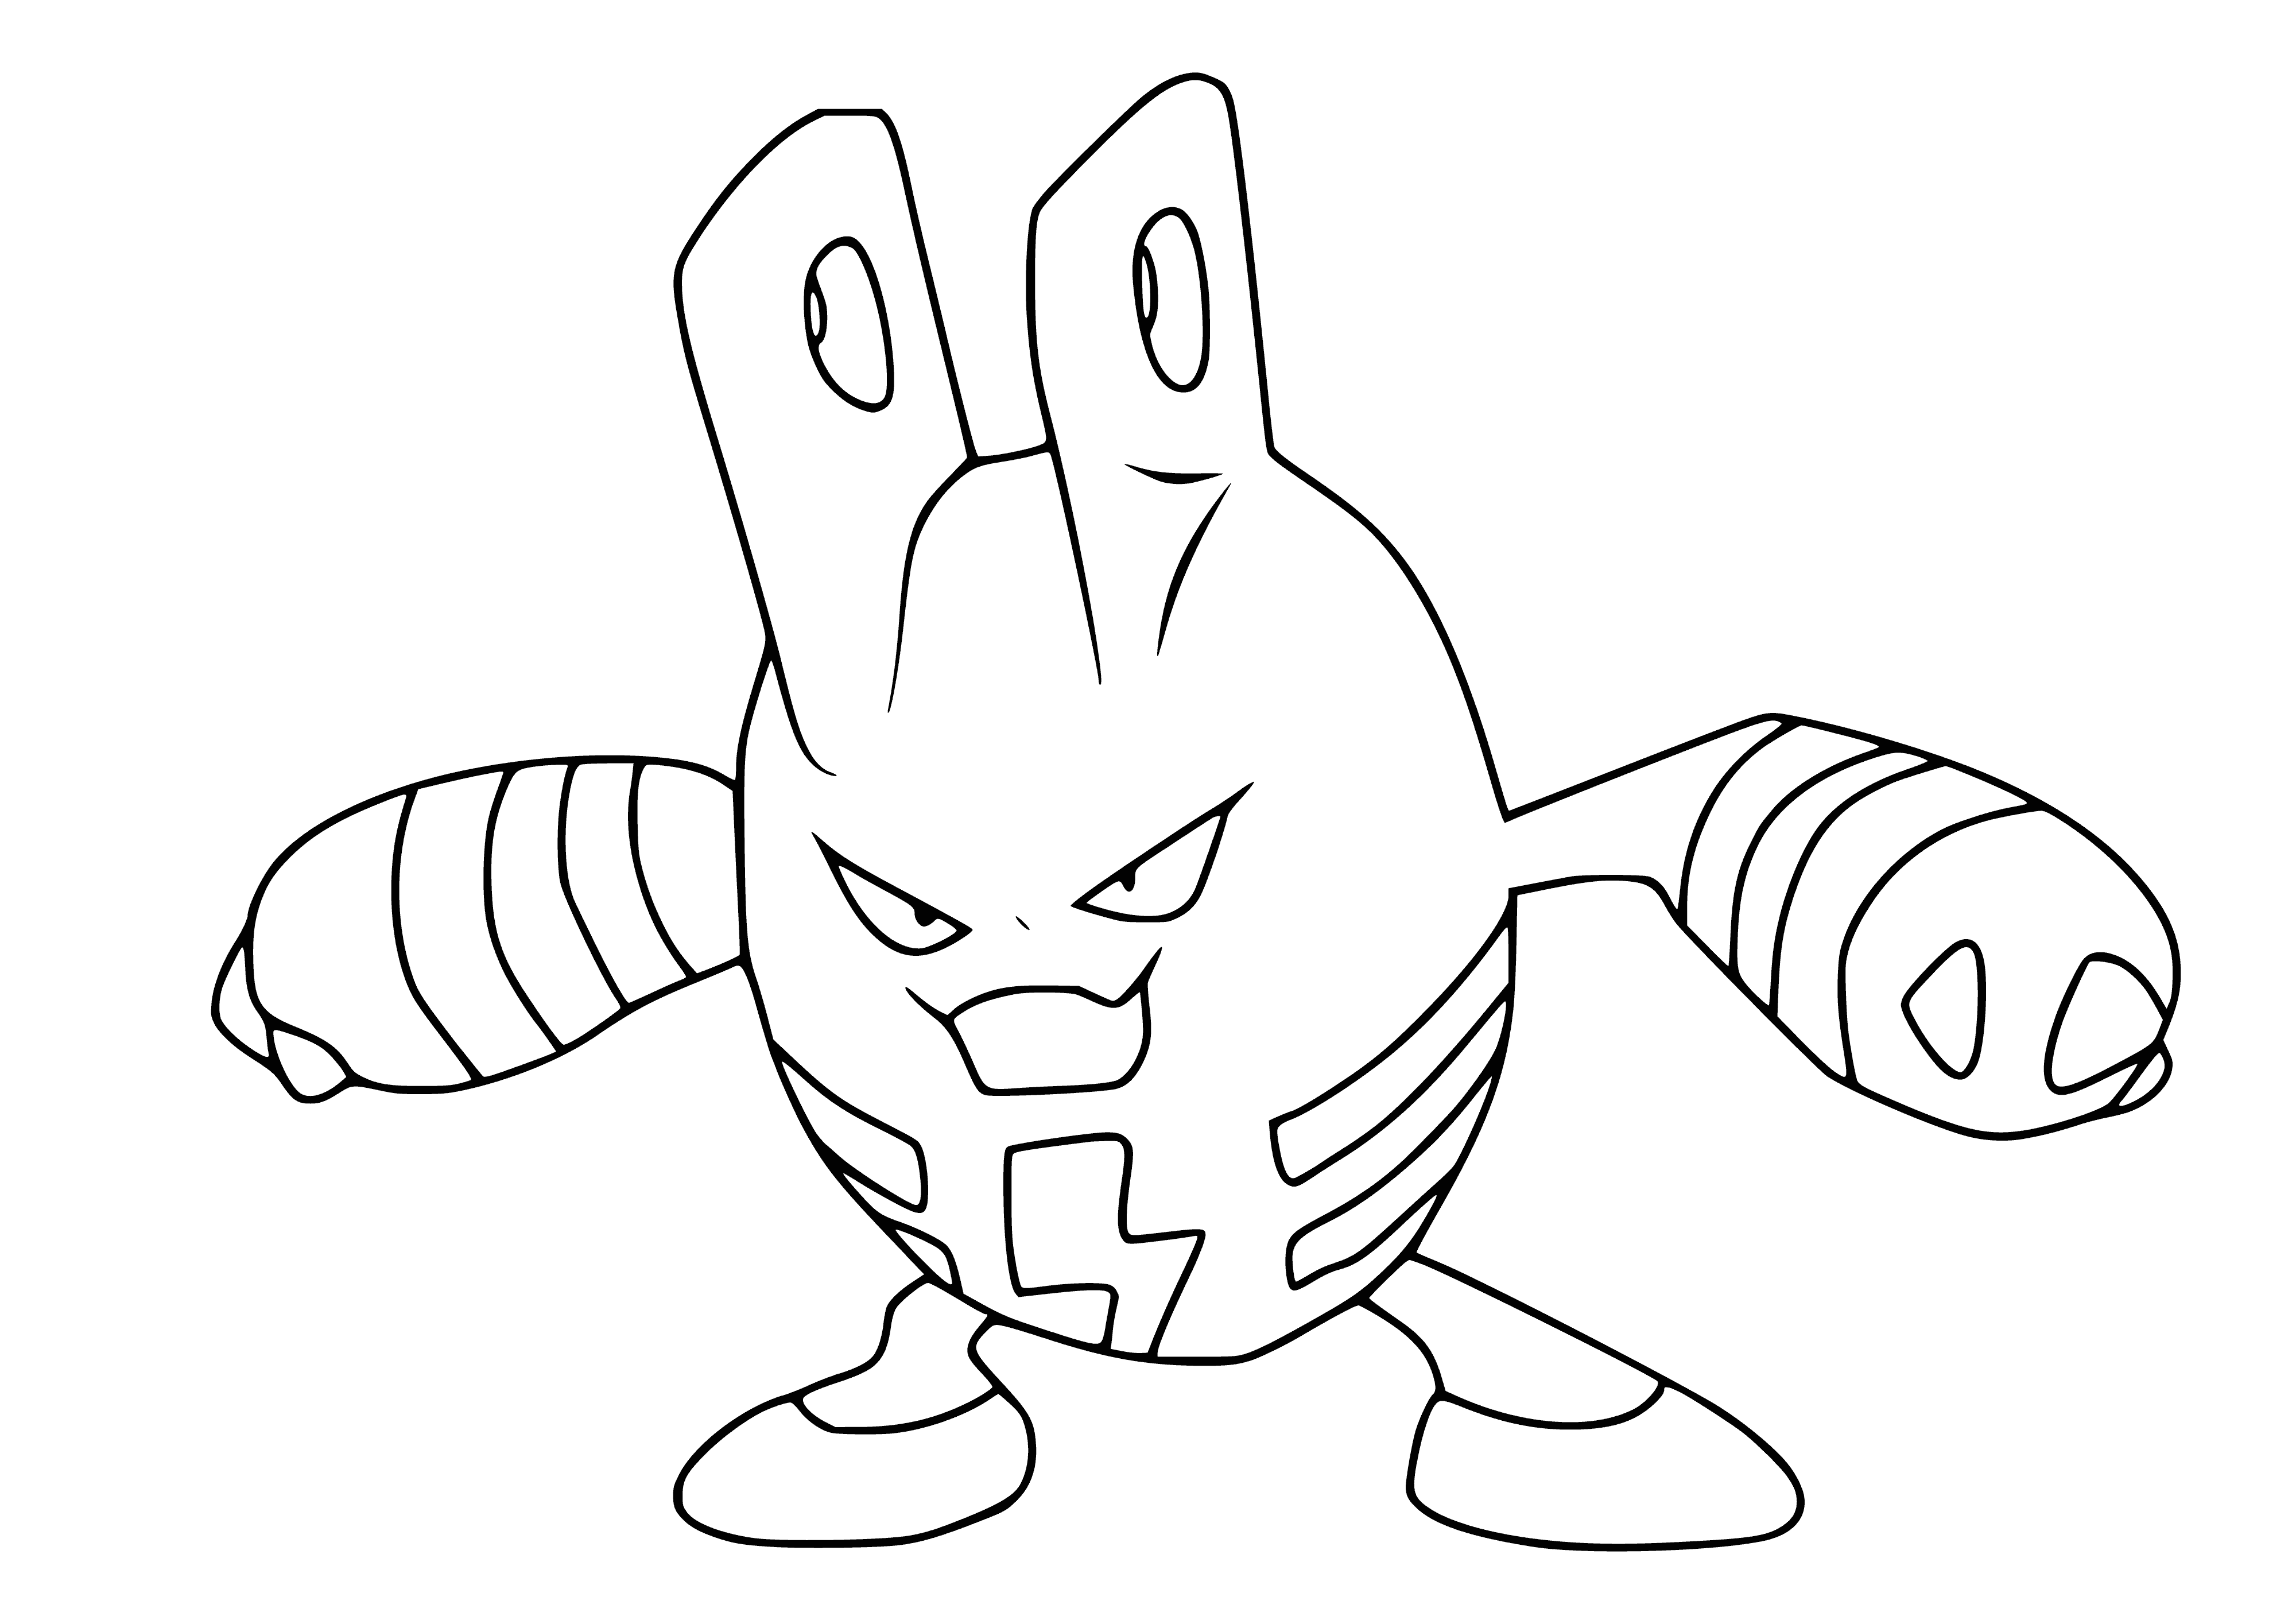 coloring page: Elekid is a small yellow Pokémon with black stripes, big eyes, thin arms + legs, & small hands + feet.